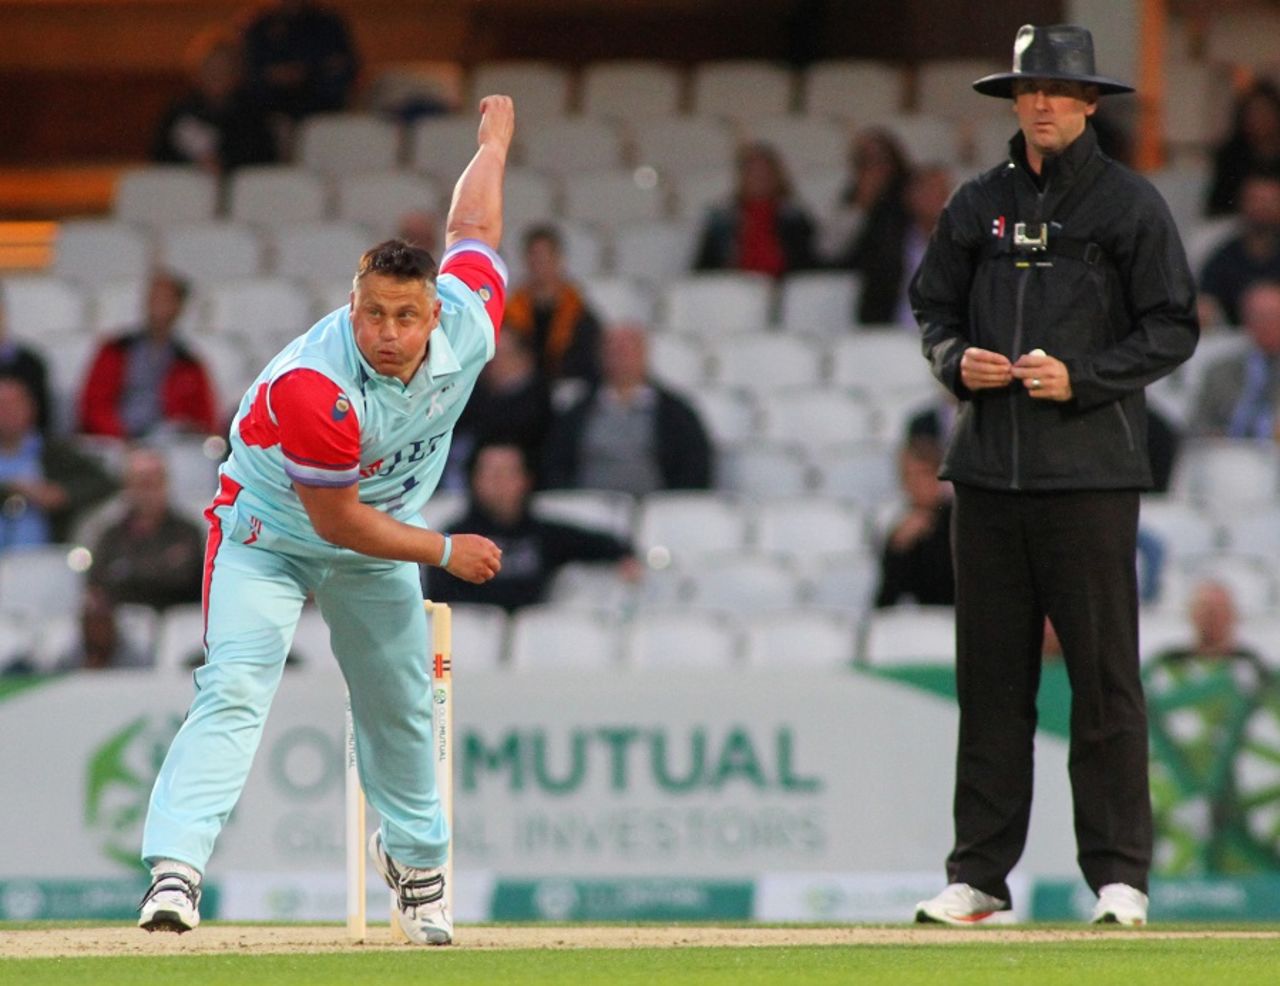 Darren Gough sends down a delivery in the Cricket for Heroes charity match, London, September 17, 2015